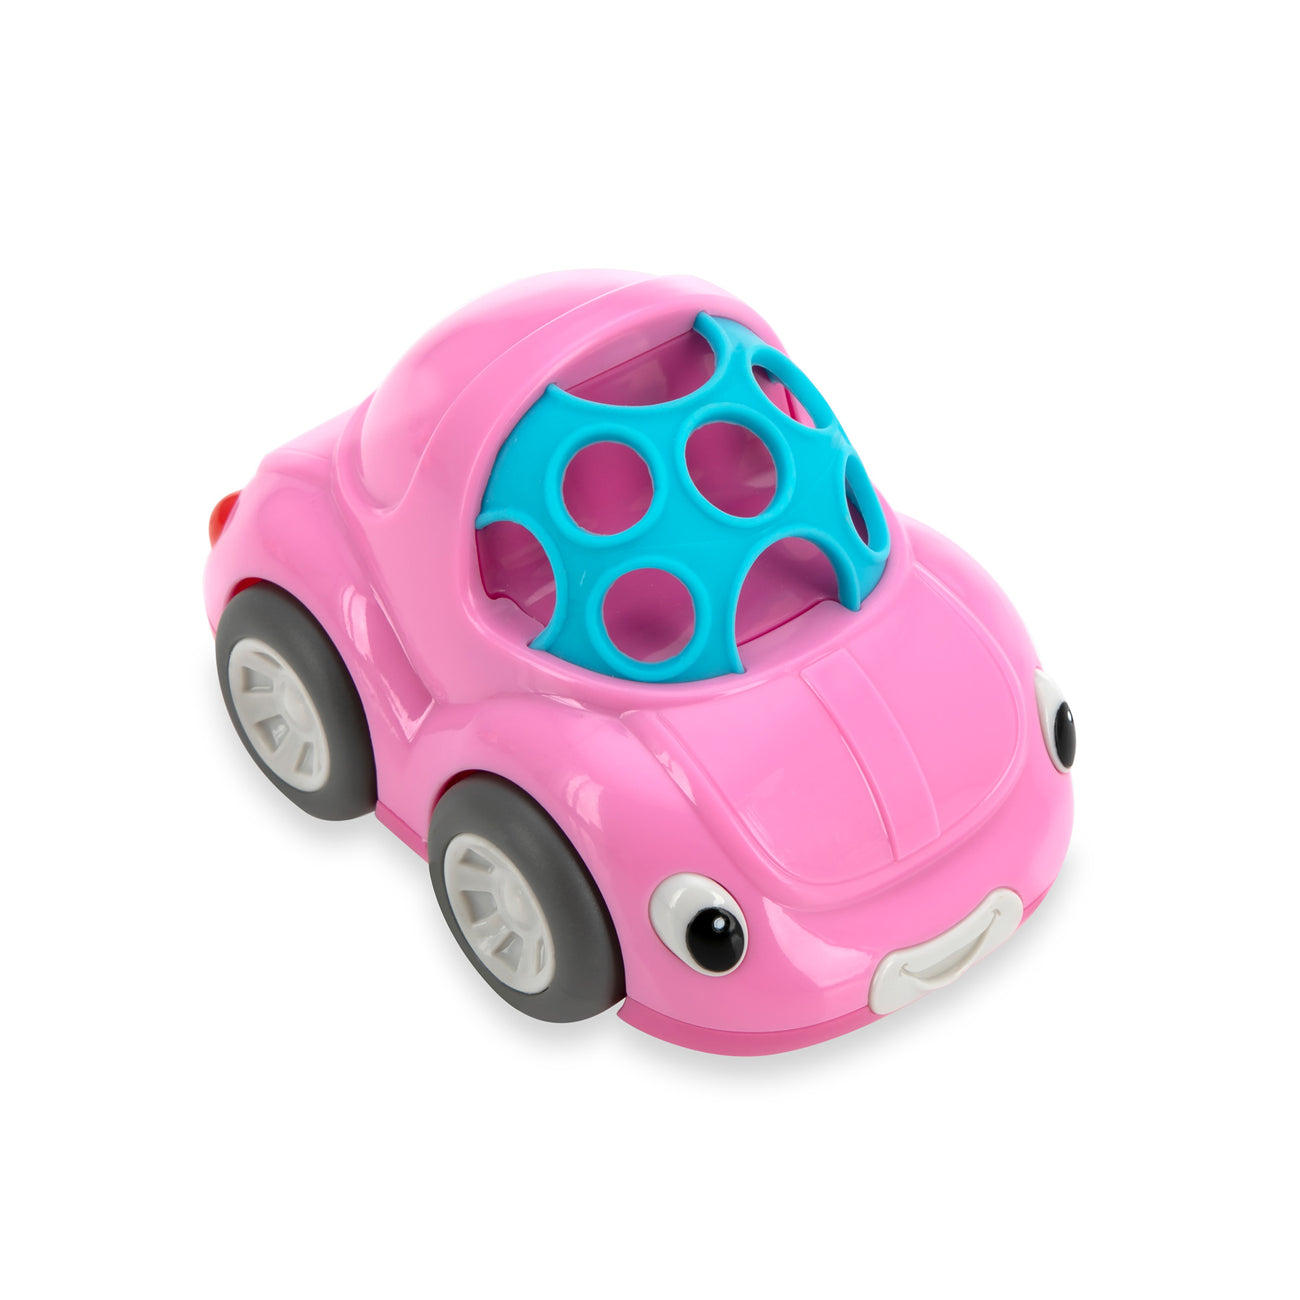 Silly Shaker Rattle Toy - Bug Car